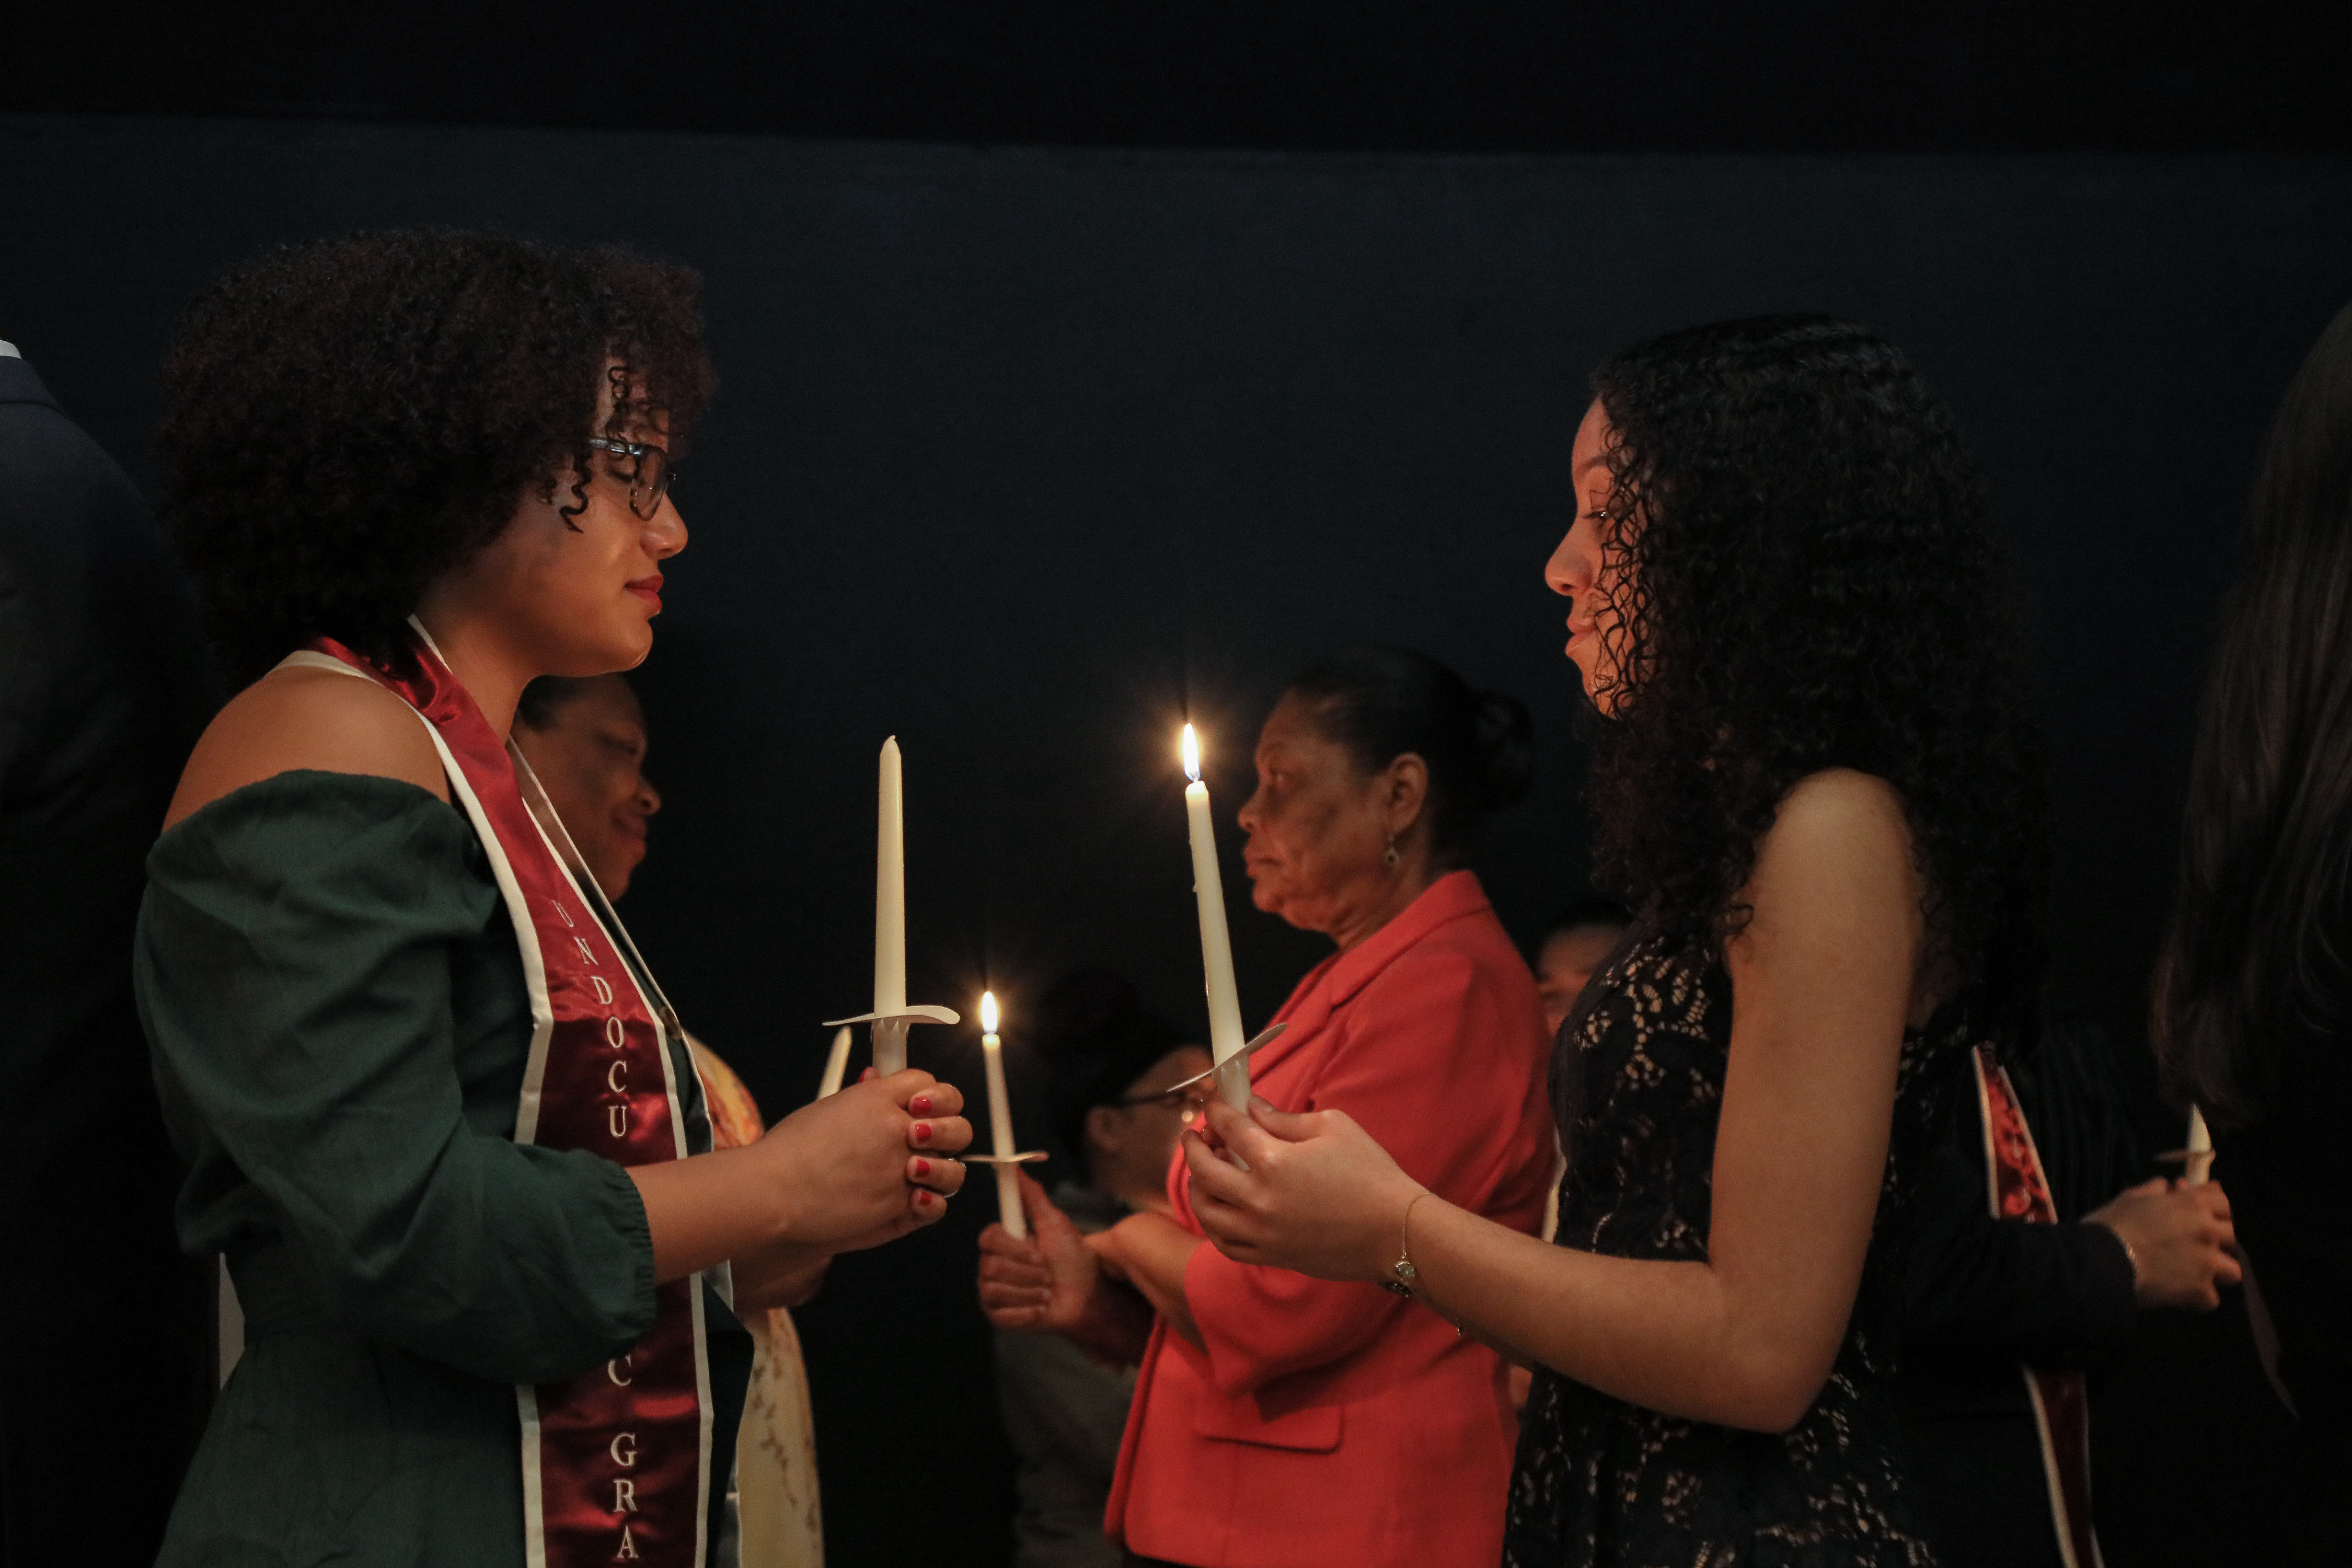 Women stand facing each other on the stage with lit candles.